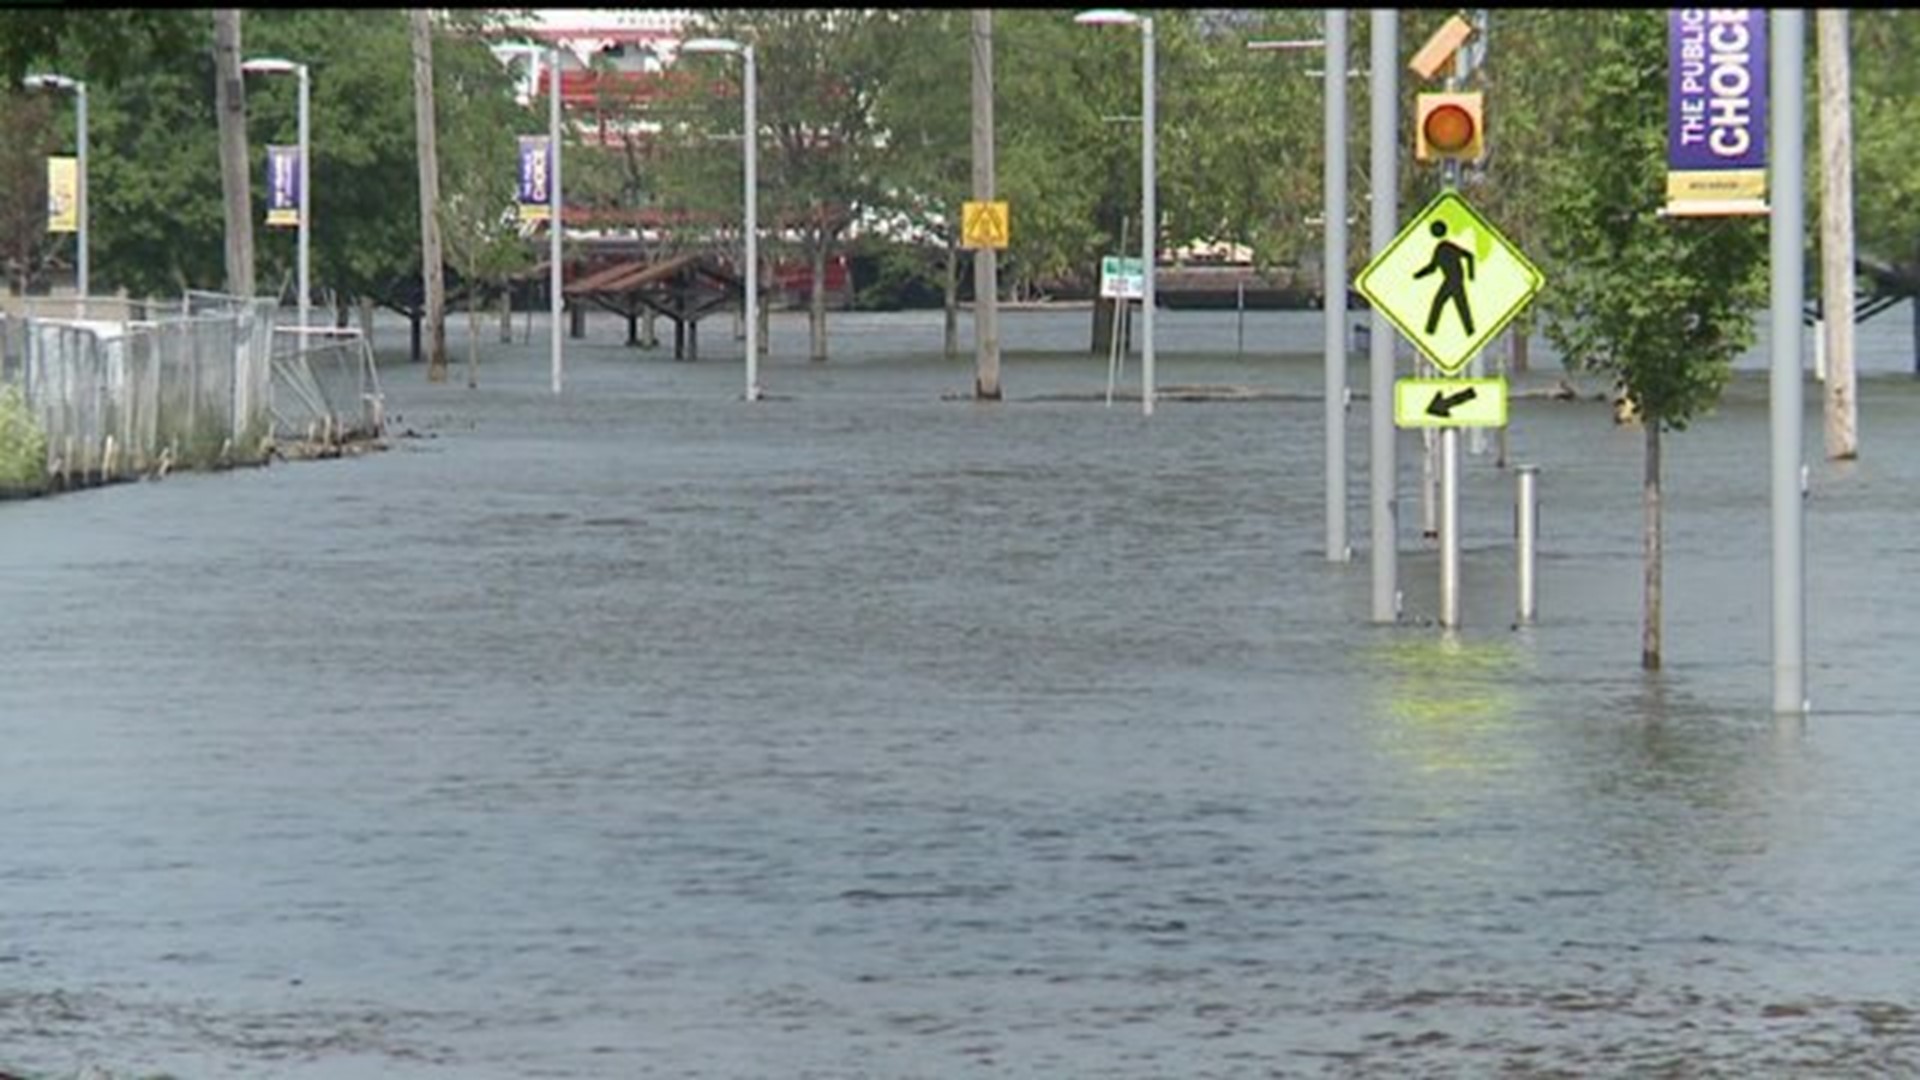 Much of downtown Davenport detoured because of flooding